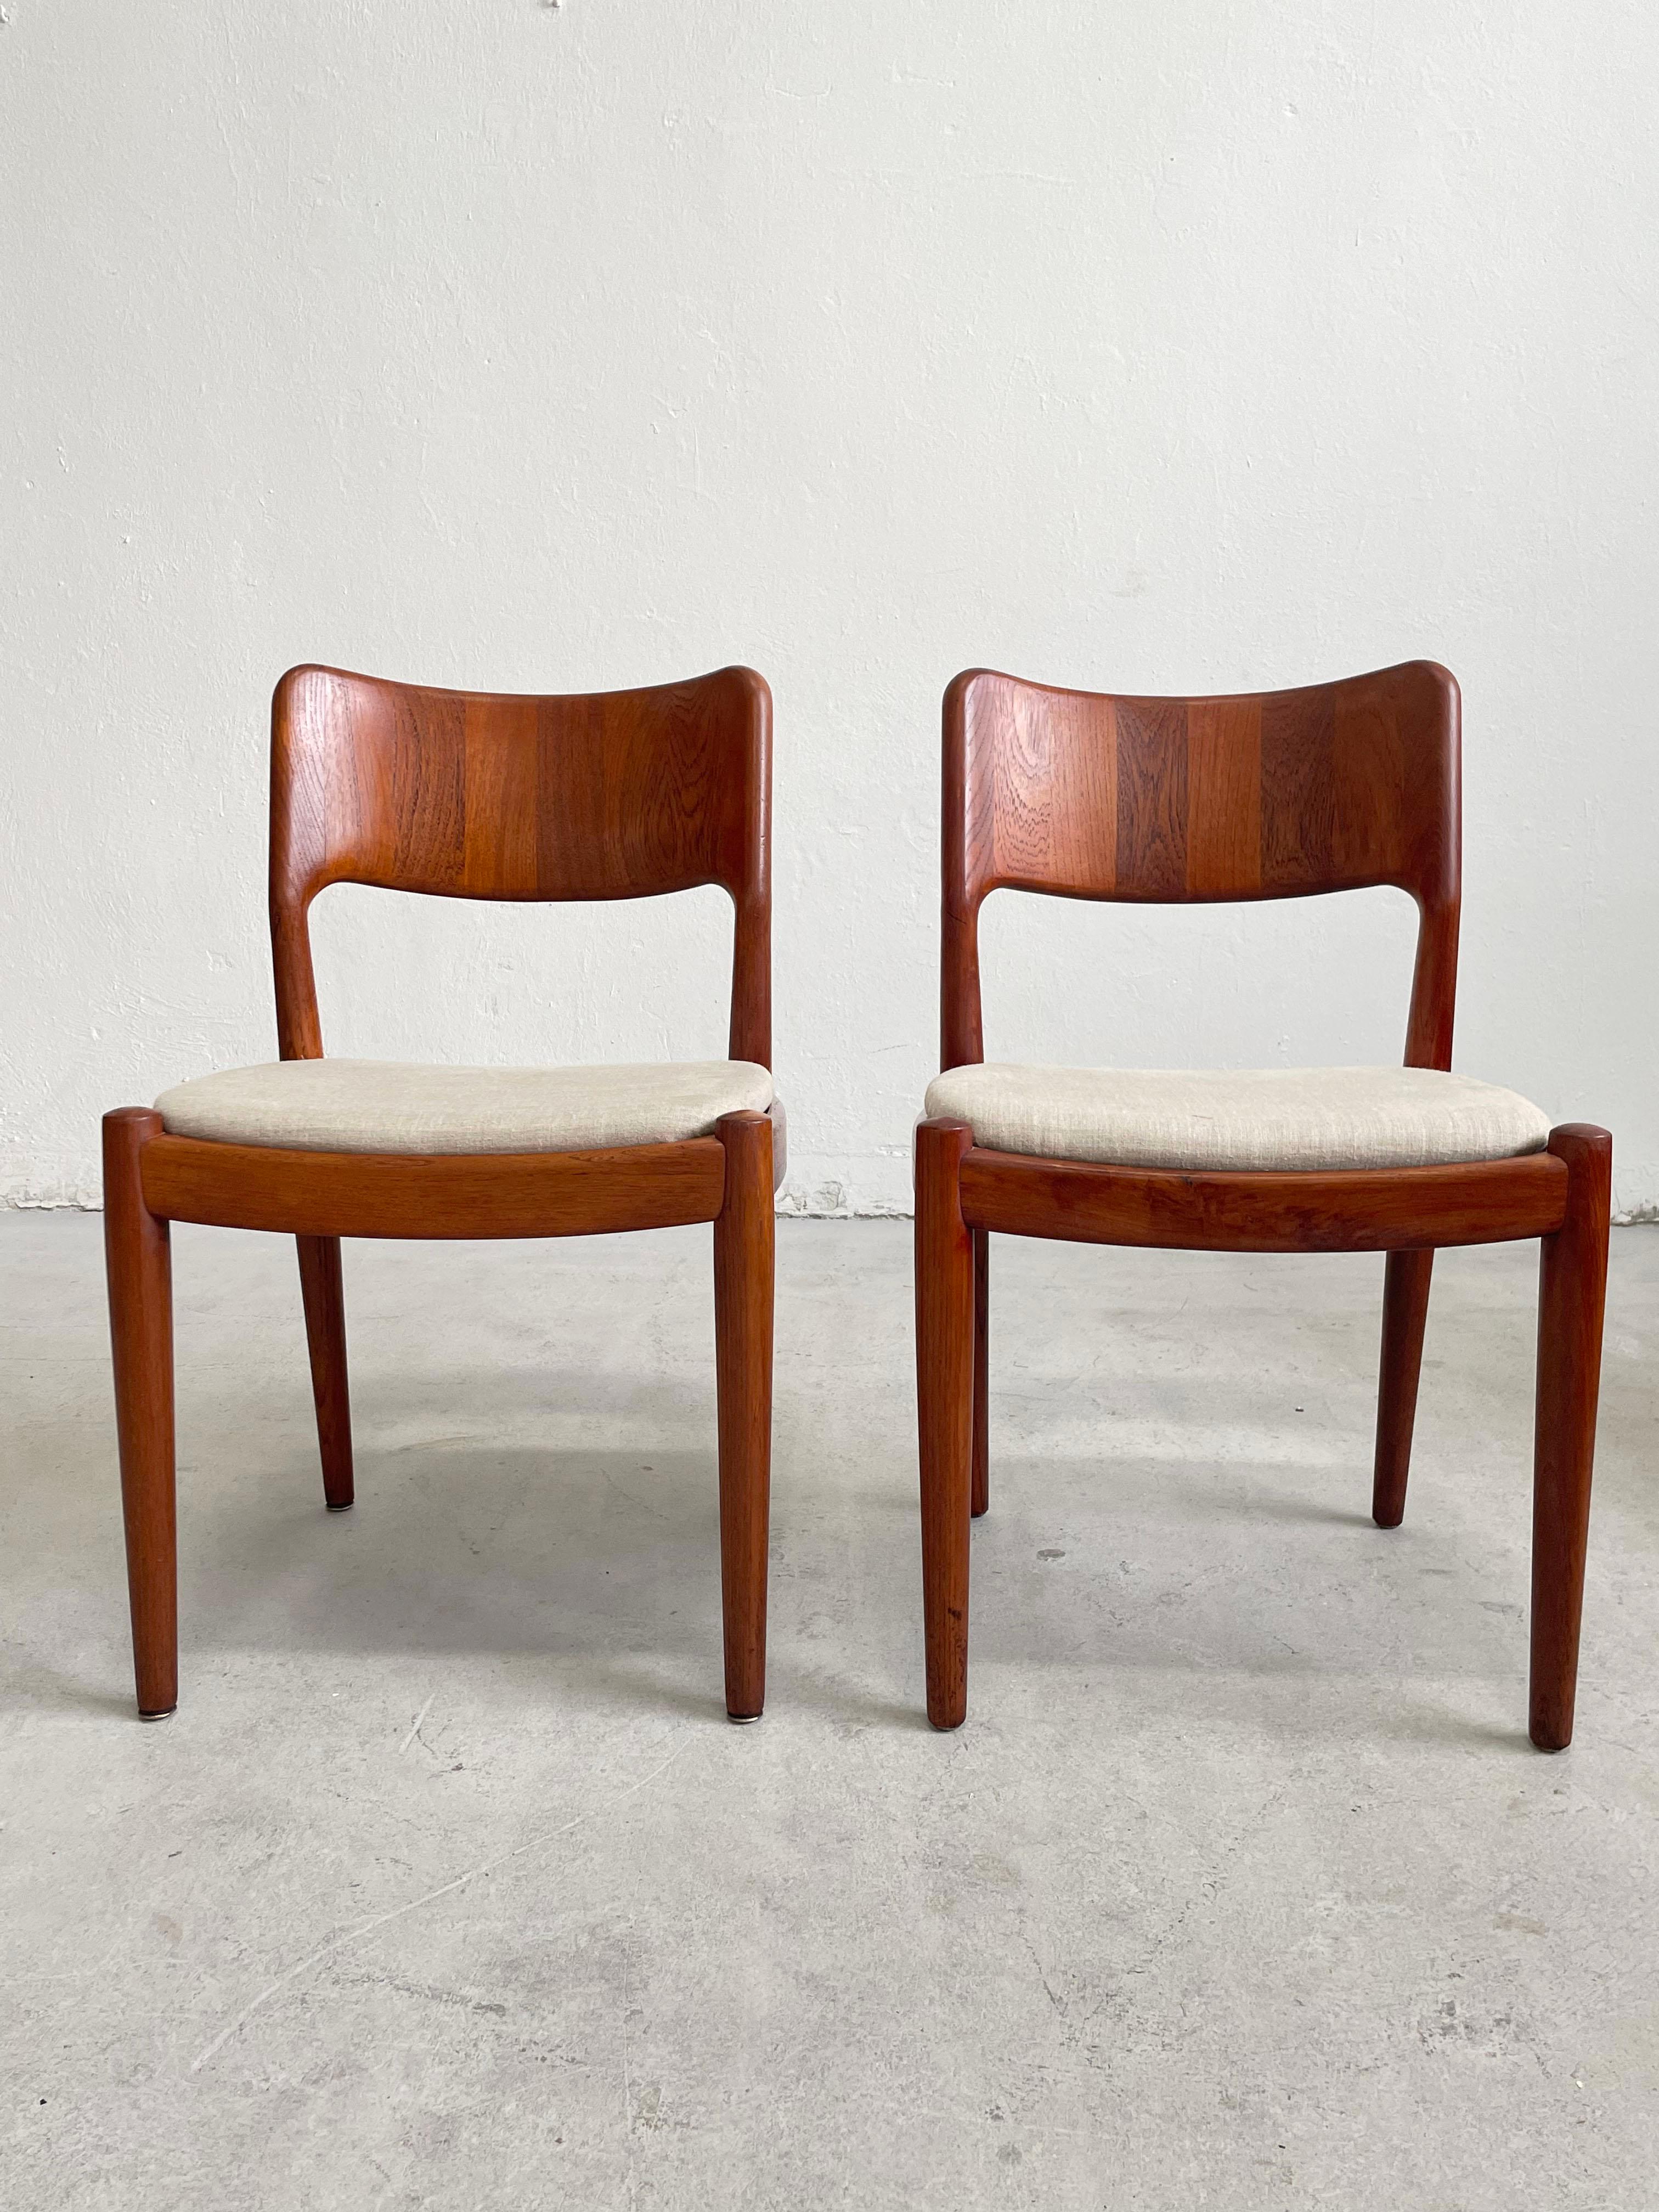 Set of 4 Vintage Scandinavian Mid-century Modern Teak Dining Chairs by Glostrup For Sale 2